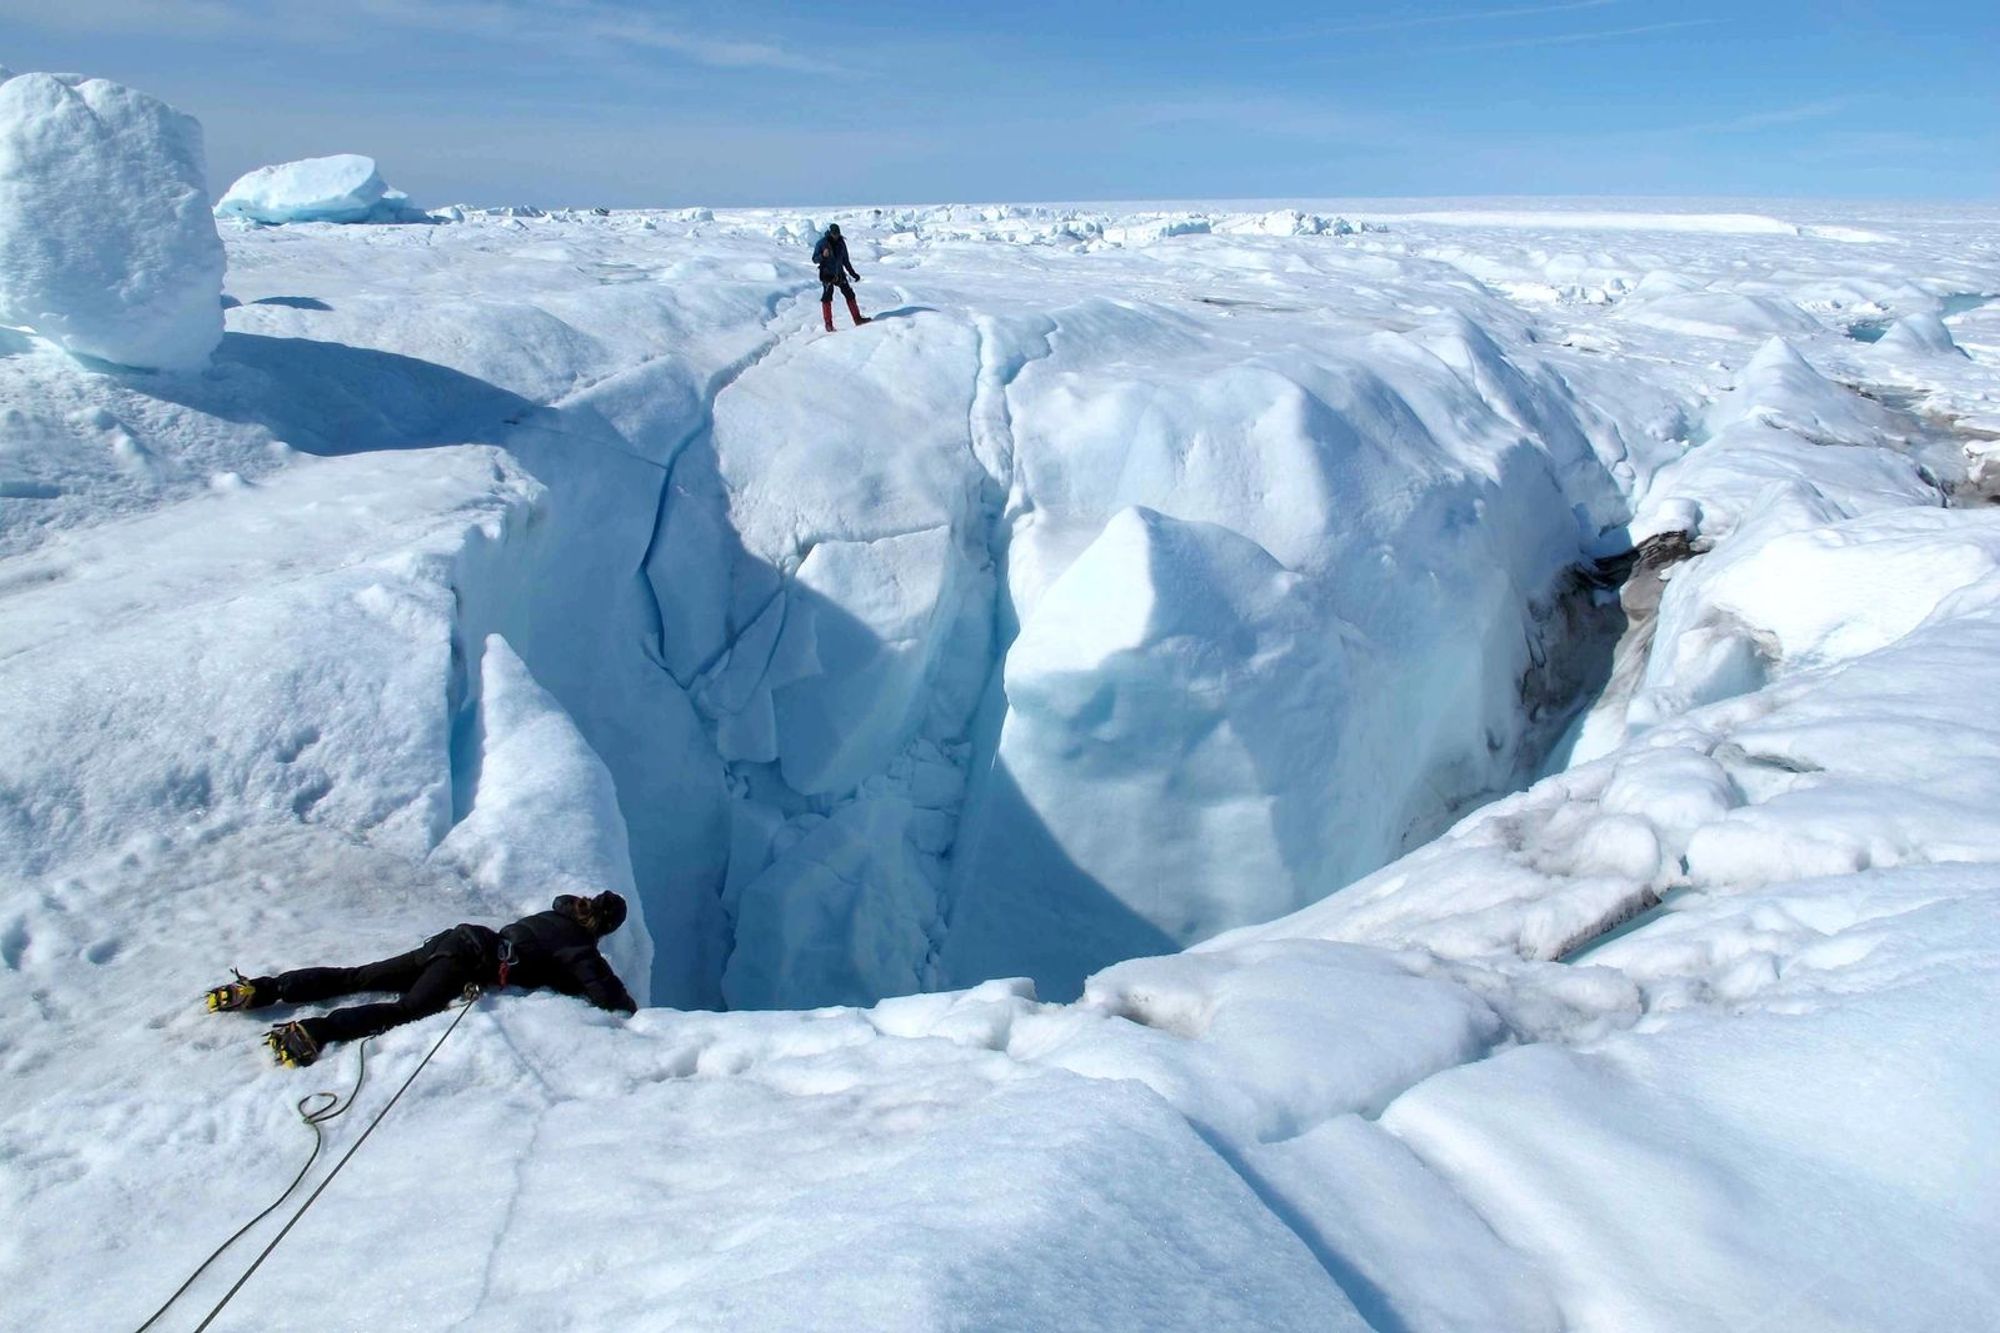 Photo of Marco Tedesco [far side of the “hole”] in Greenland on expedition described in his book The Hidden Life of Ice.